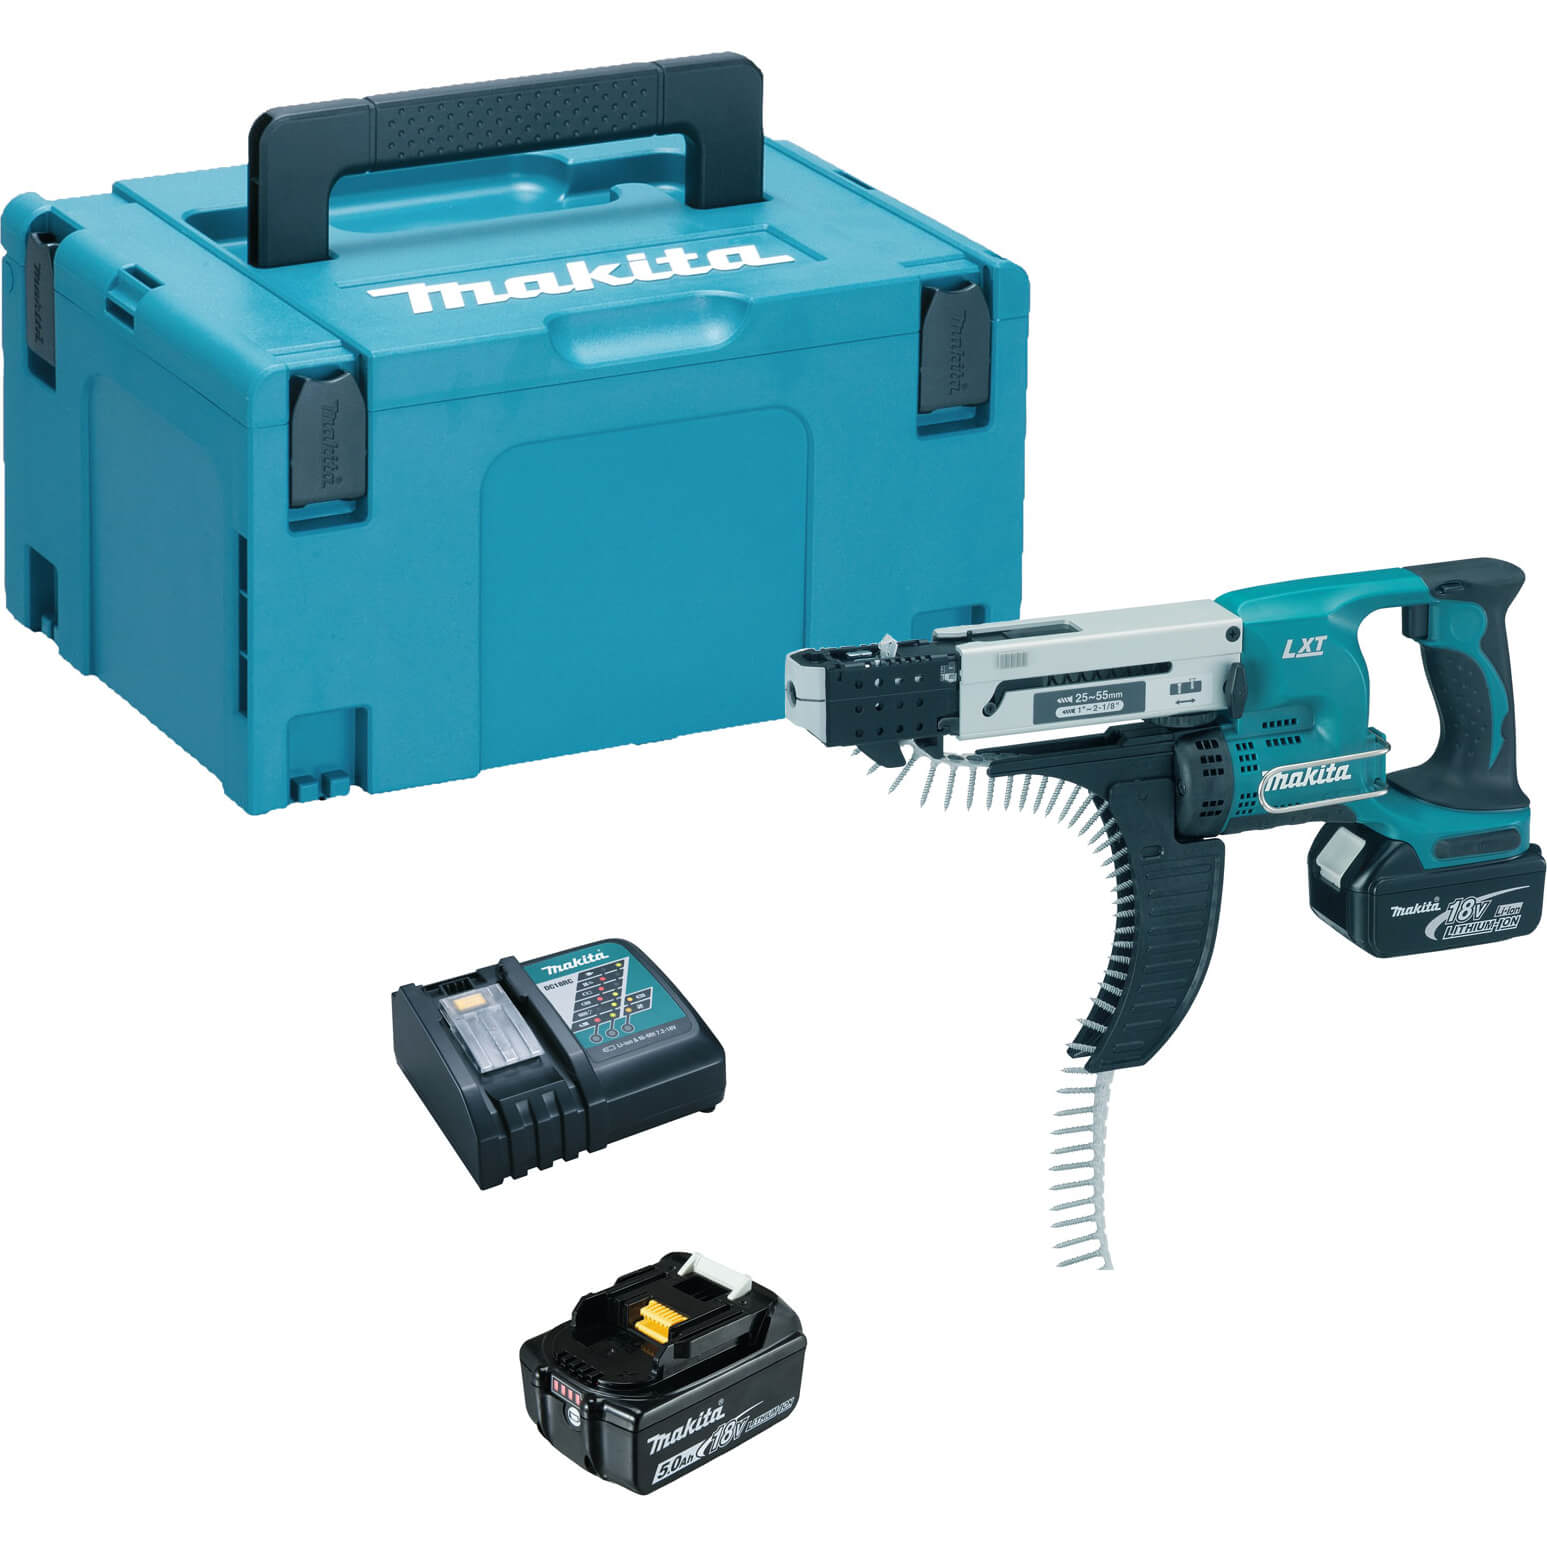 Image of Makita DFR550 18v LXT Cordless Auto Feed Screwdriver 2 x 5ah Li-ion Charger Case